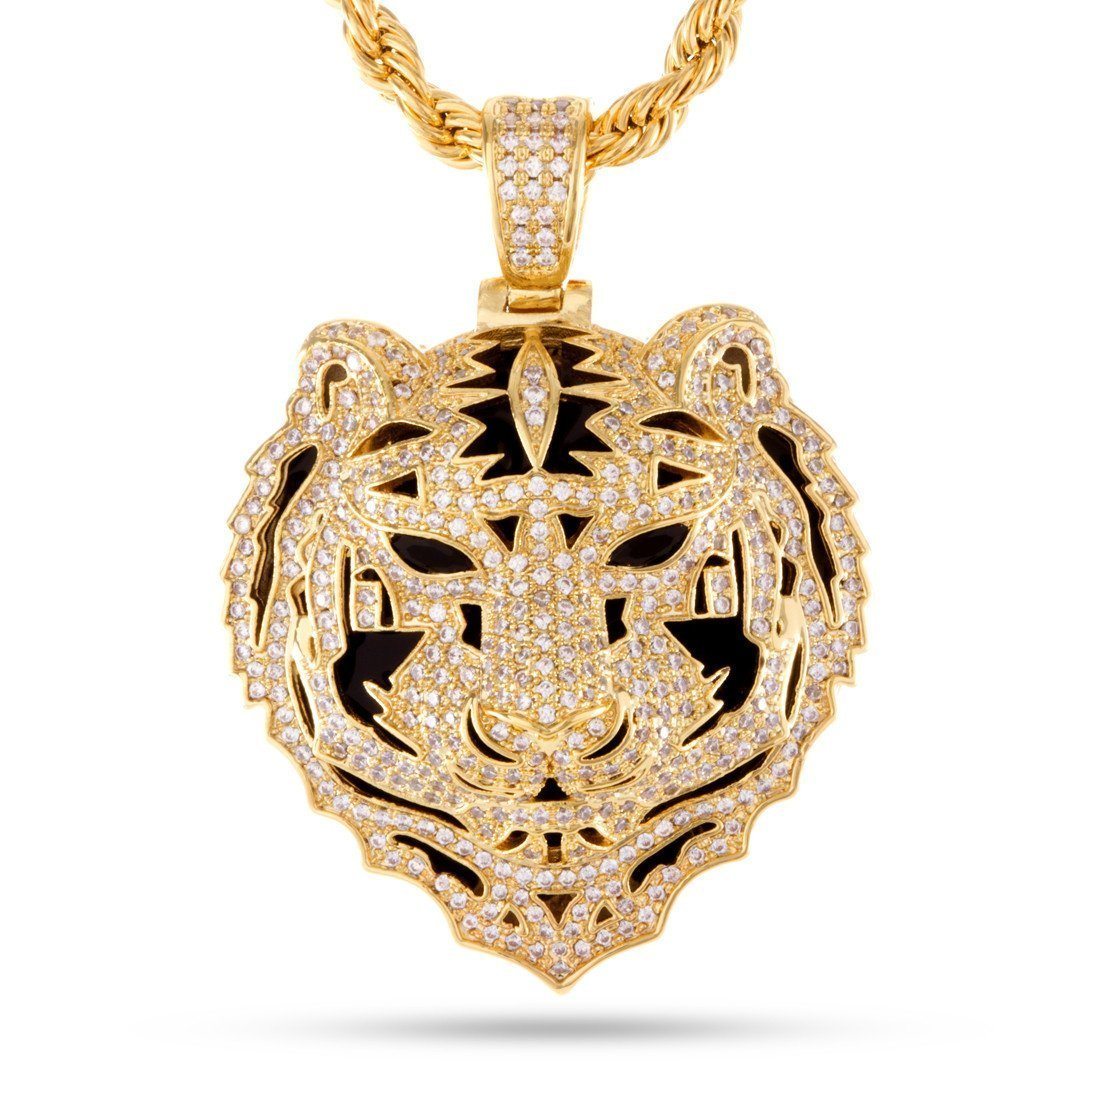 Image of Bengal Tiger Necklace - Designed by Snoop Dogg